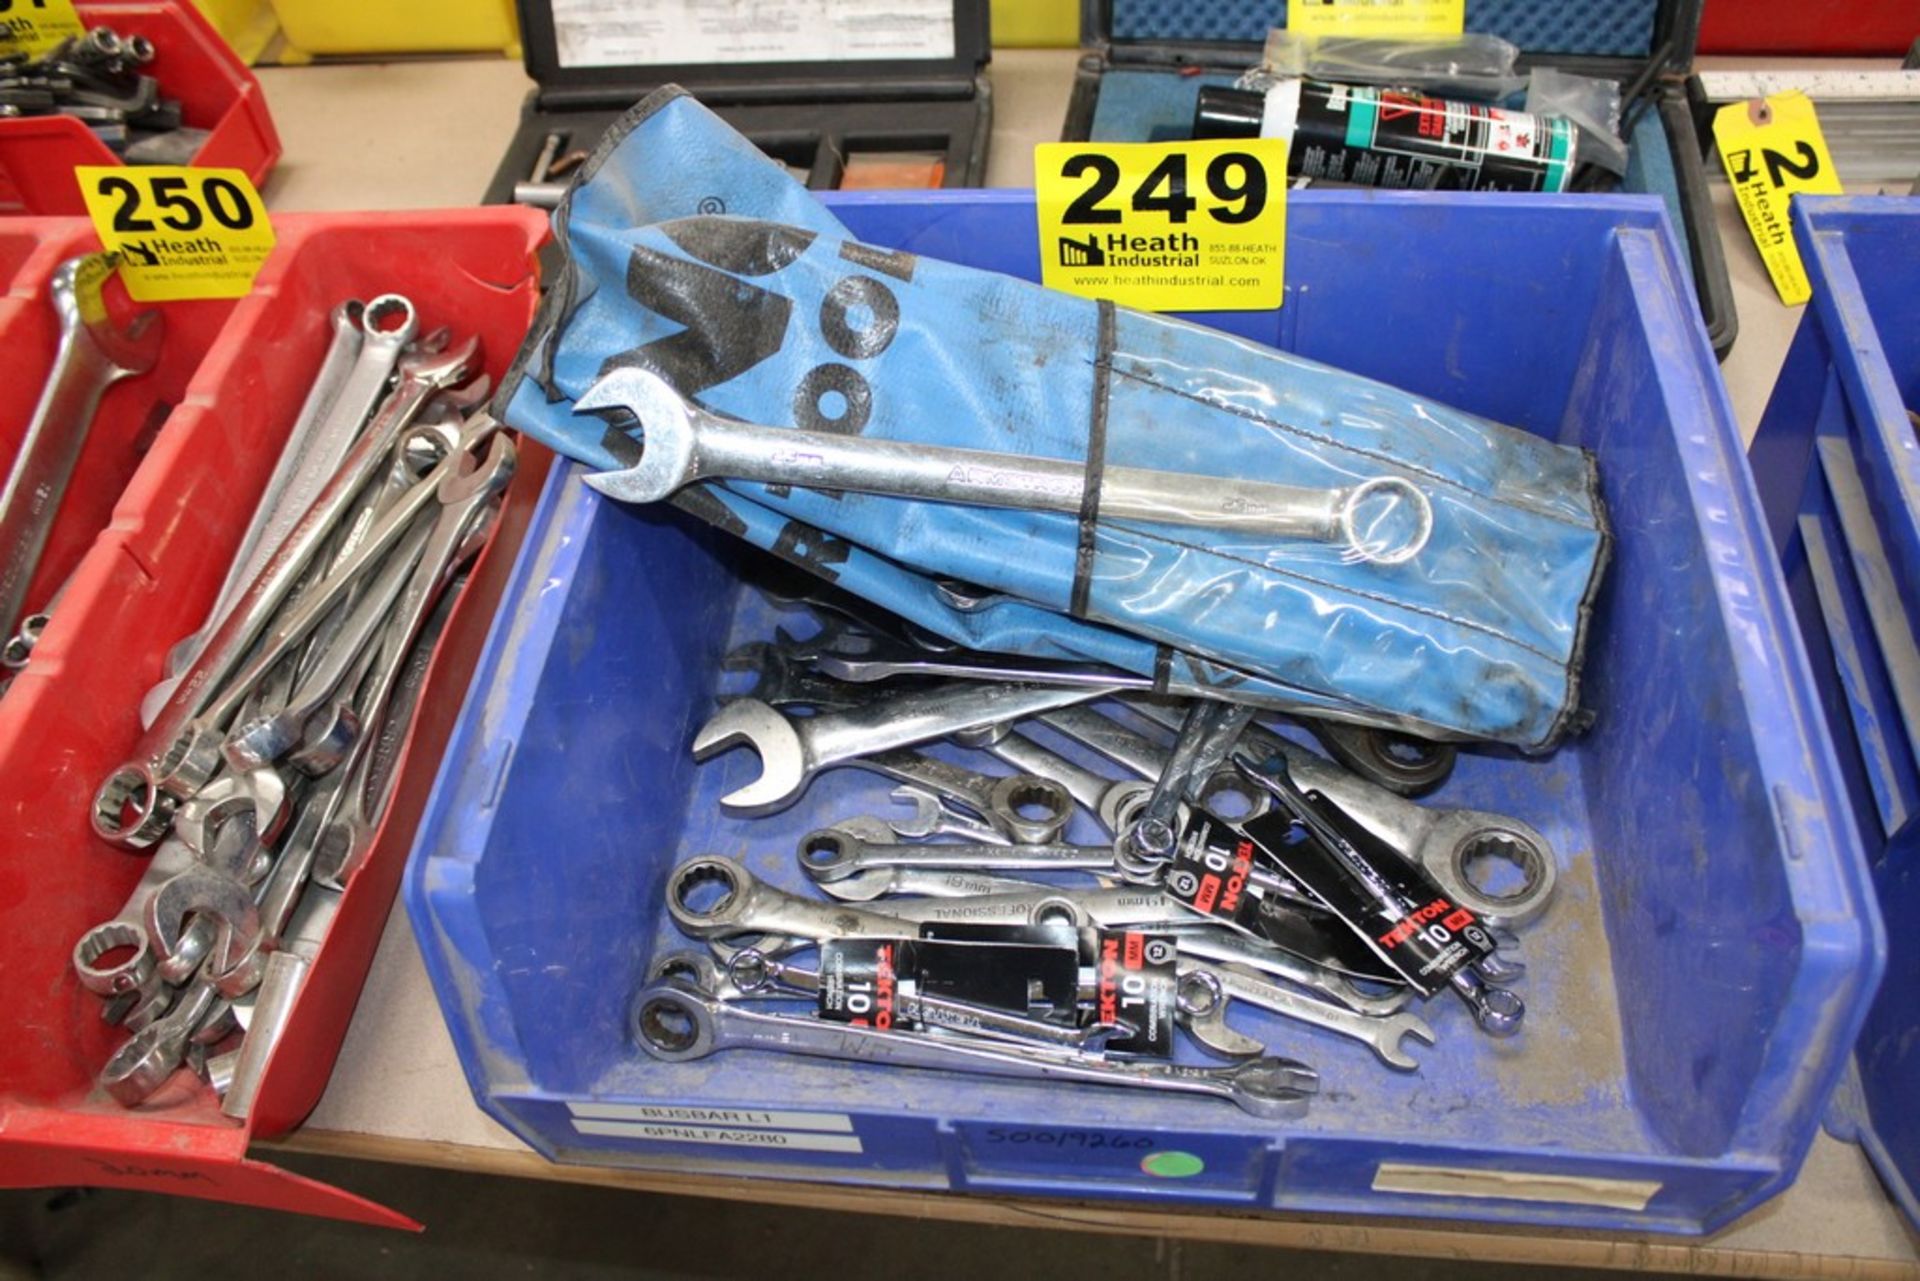 ASSORTED COMBINATION WRENCHES IN BOX. SOME ARE RATCHET WRENCHES